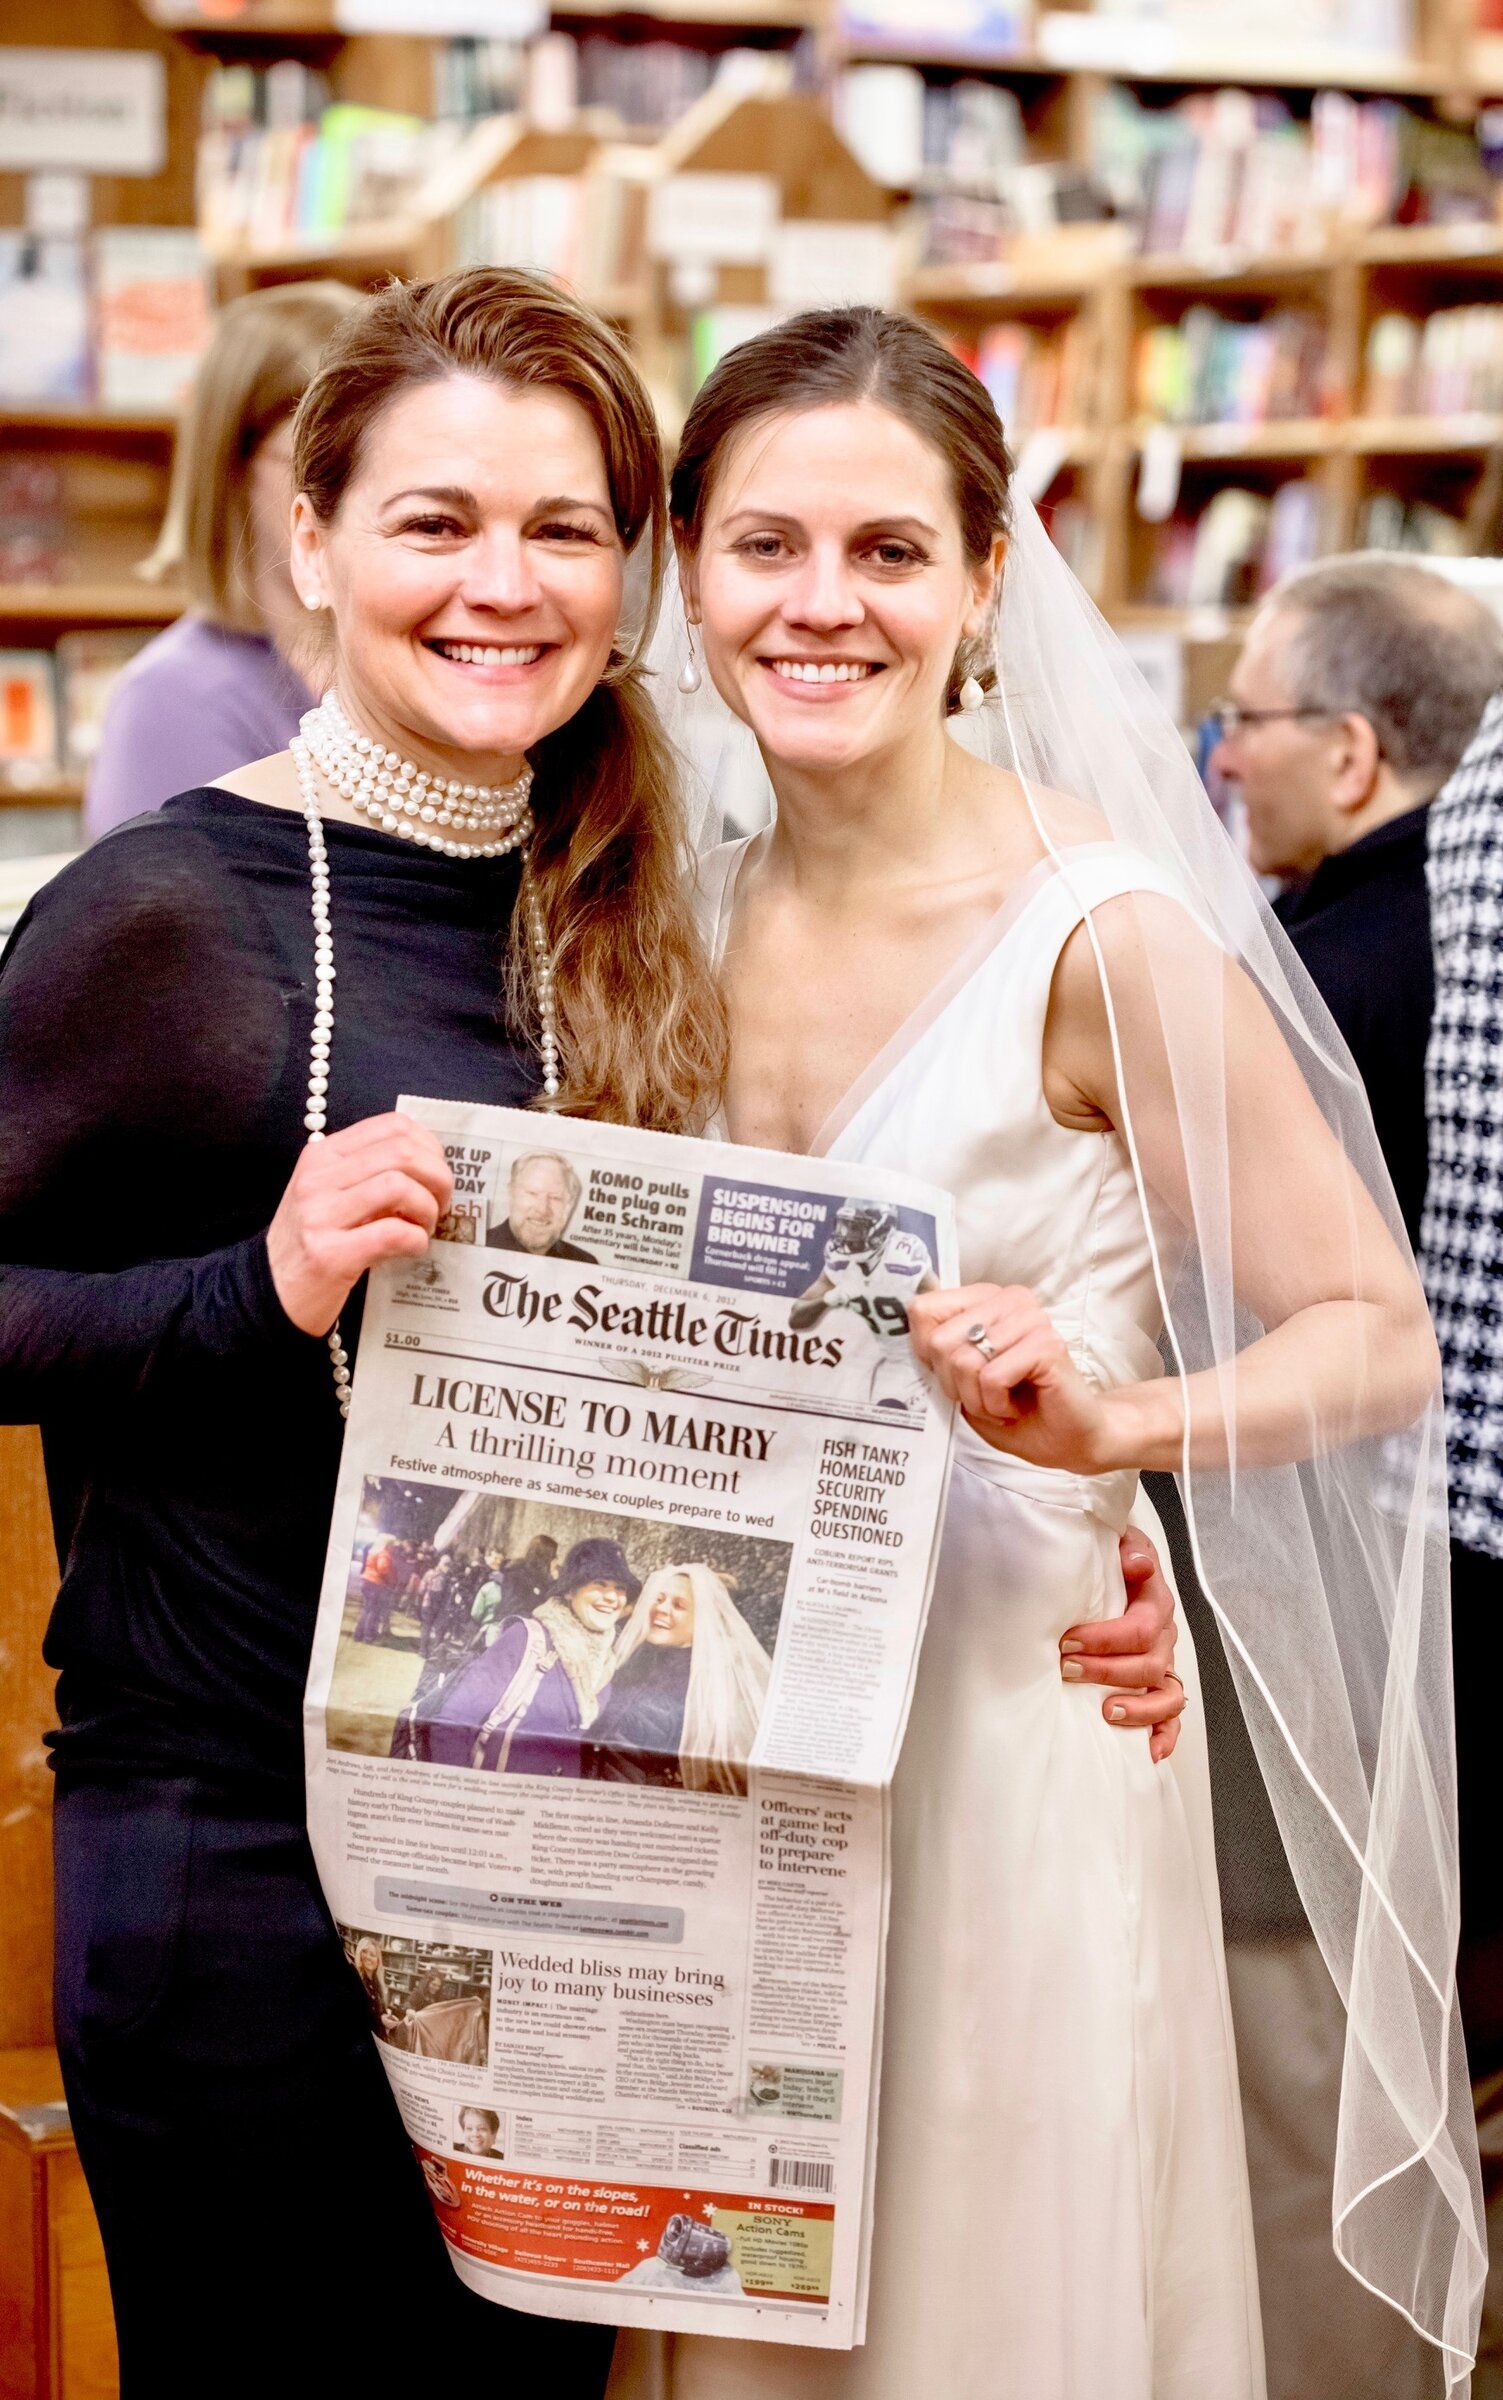 Happy anniversary! Its been 10 years since WA legalized same-sex marriage, including mine The Seattle Times photo